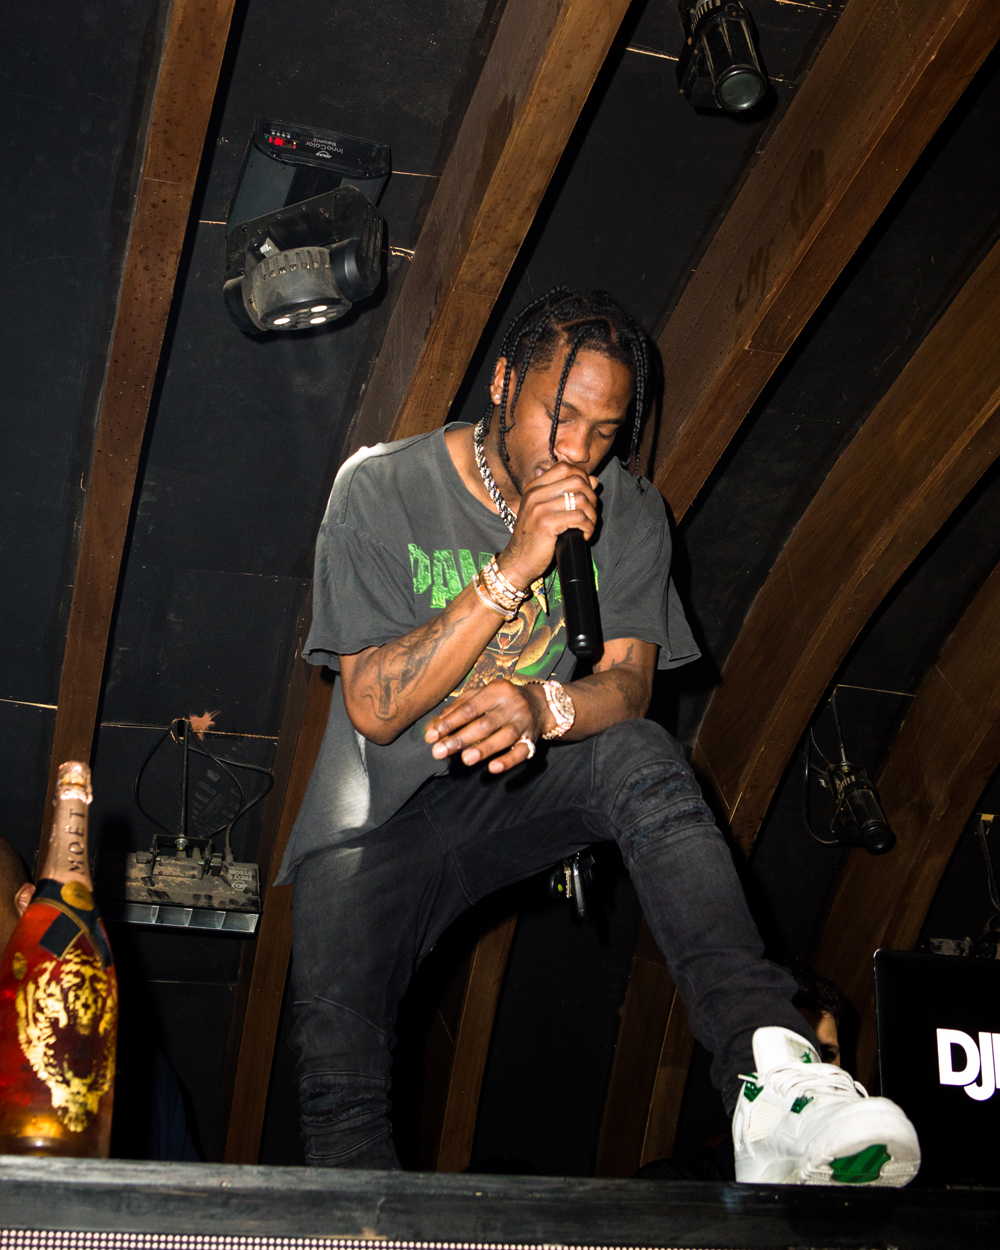 SPOTTED: Travis Scott Performs at Rolling Loud in Louis Vuitton